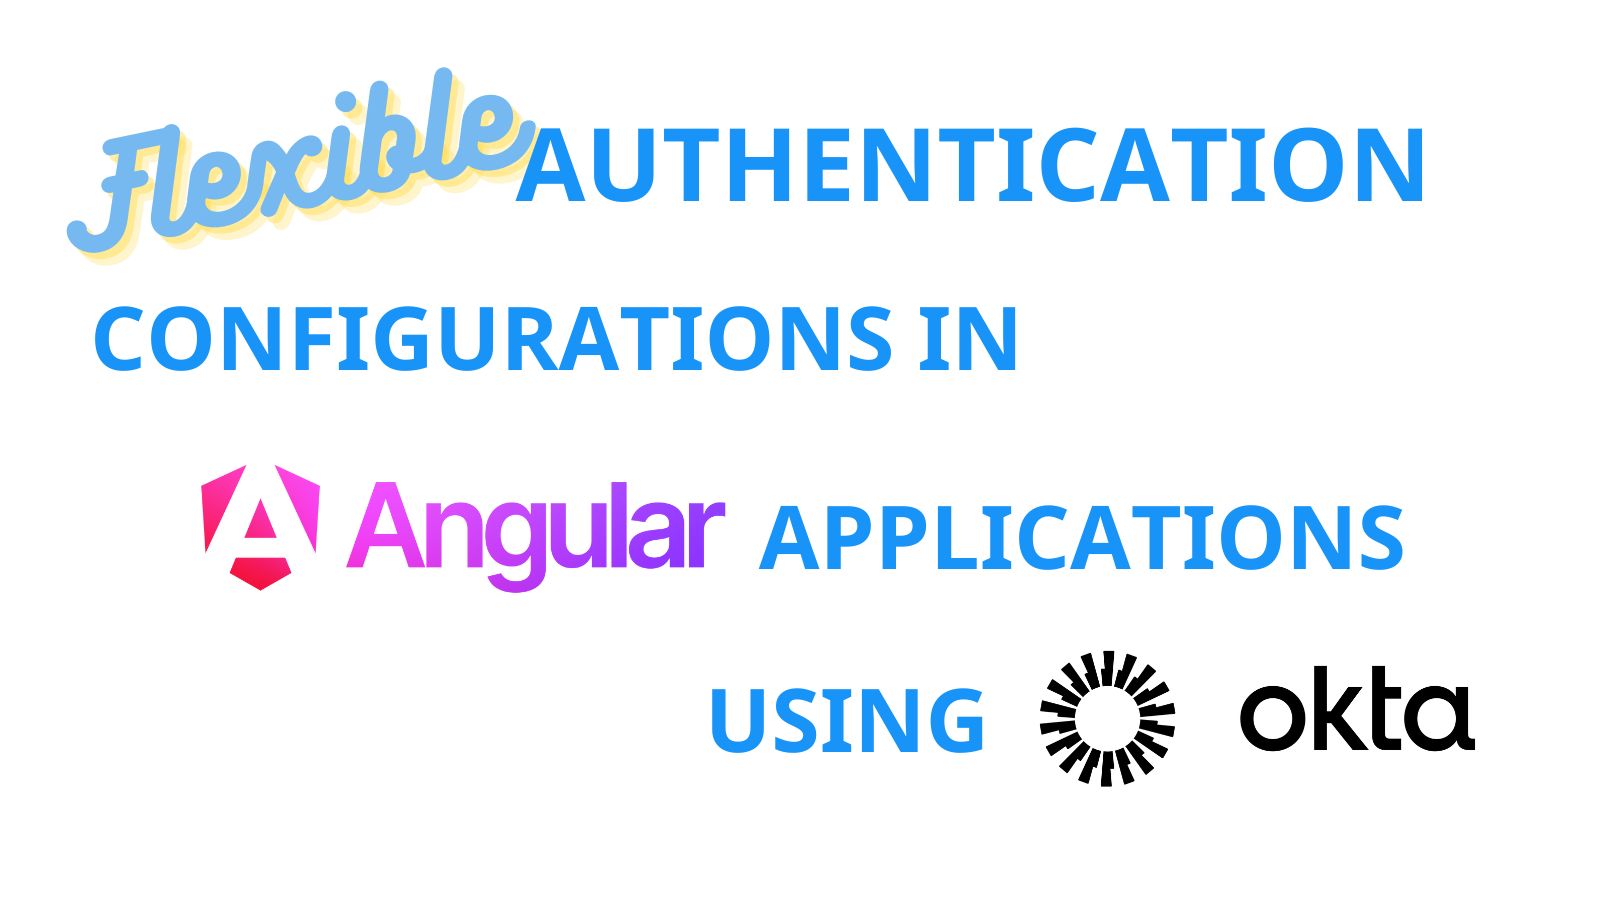 Flexible Authentication Configurations in Angular Applications Using Okta